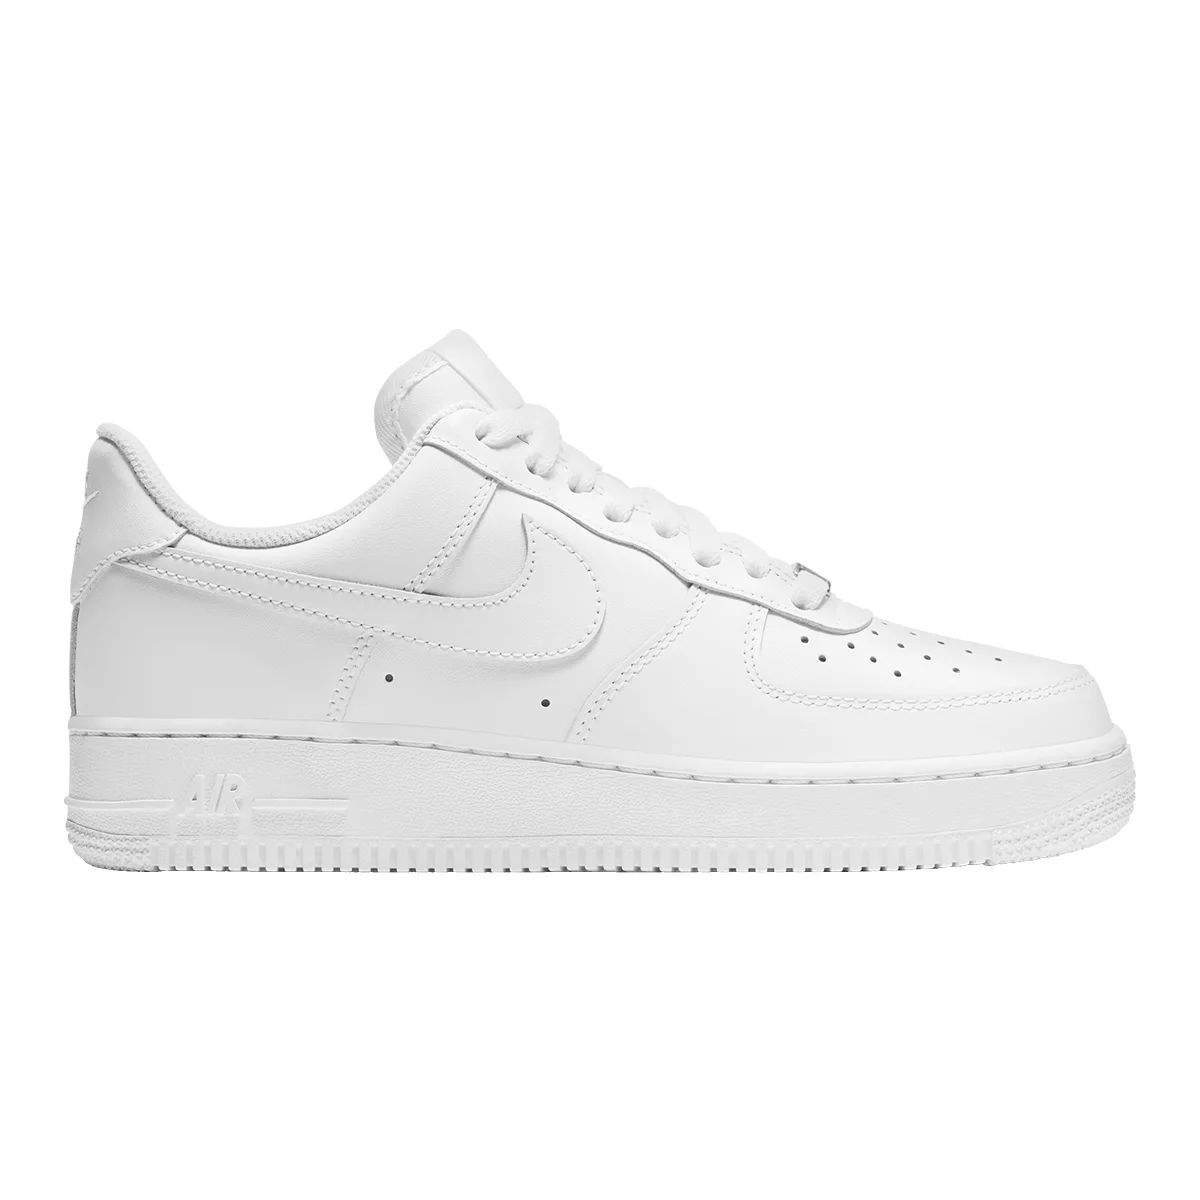 Nike Women's Air Force 1 ’07 Shoes  Sneakers Low Top Basketball